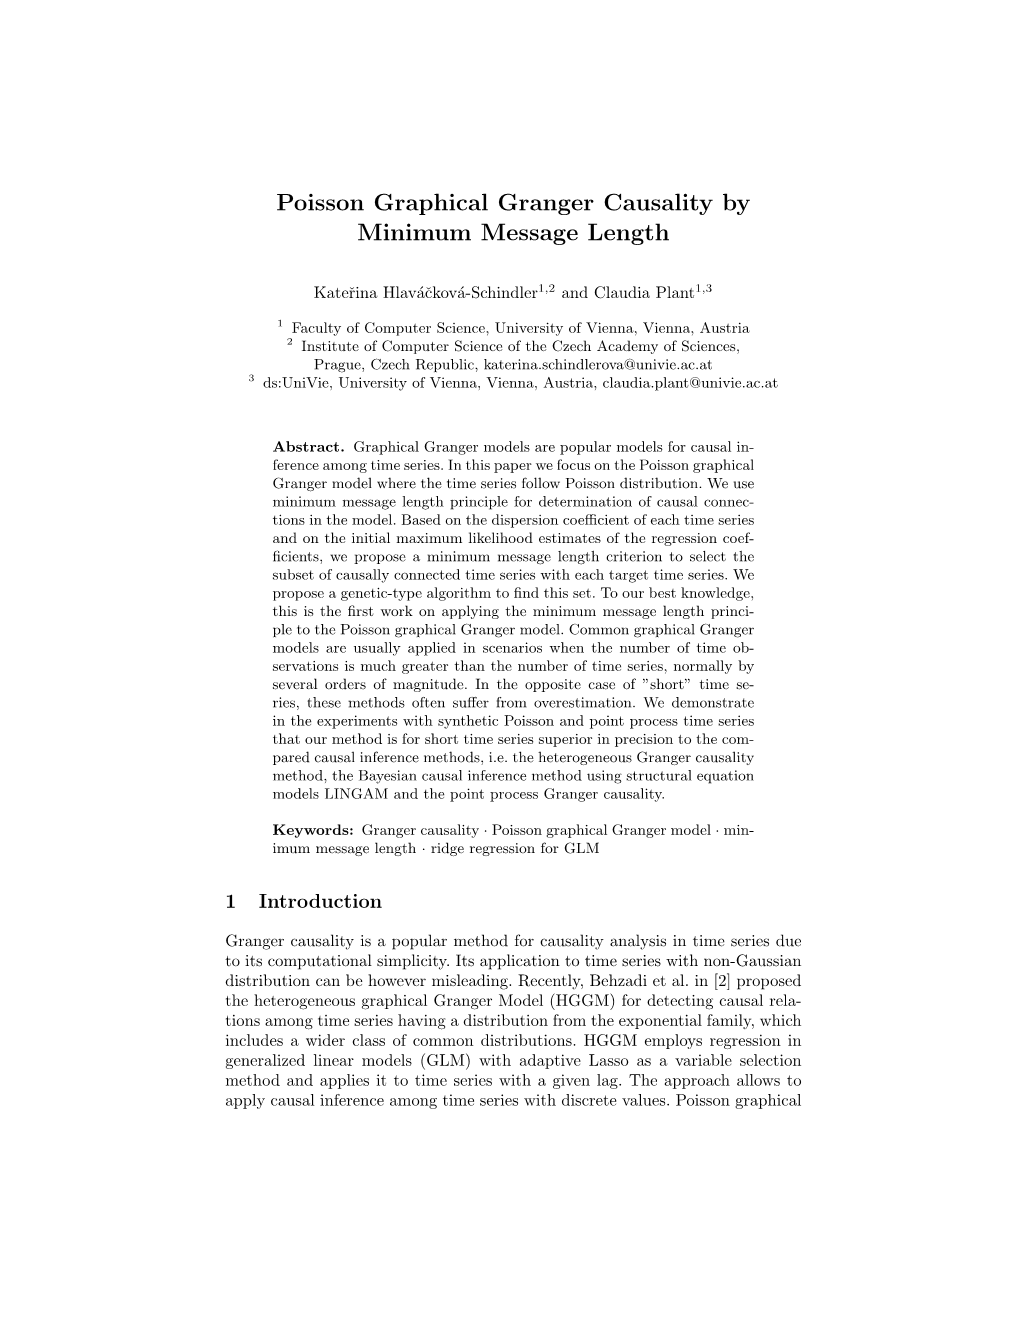 Poisson Graphical Granger Causality by Minimum Message Length